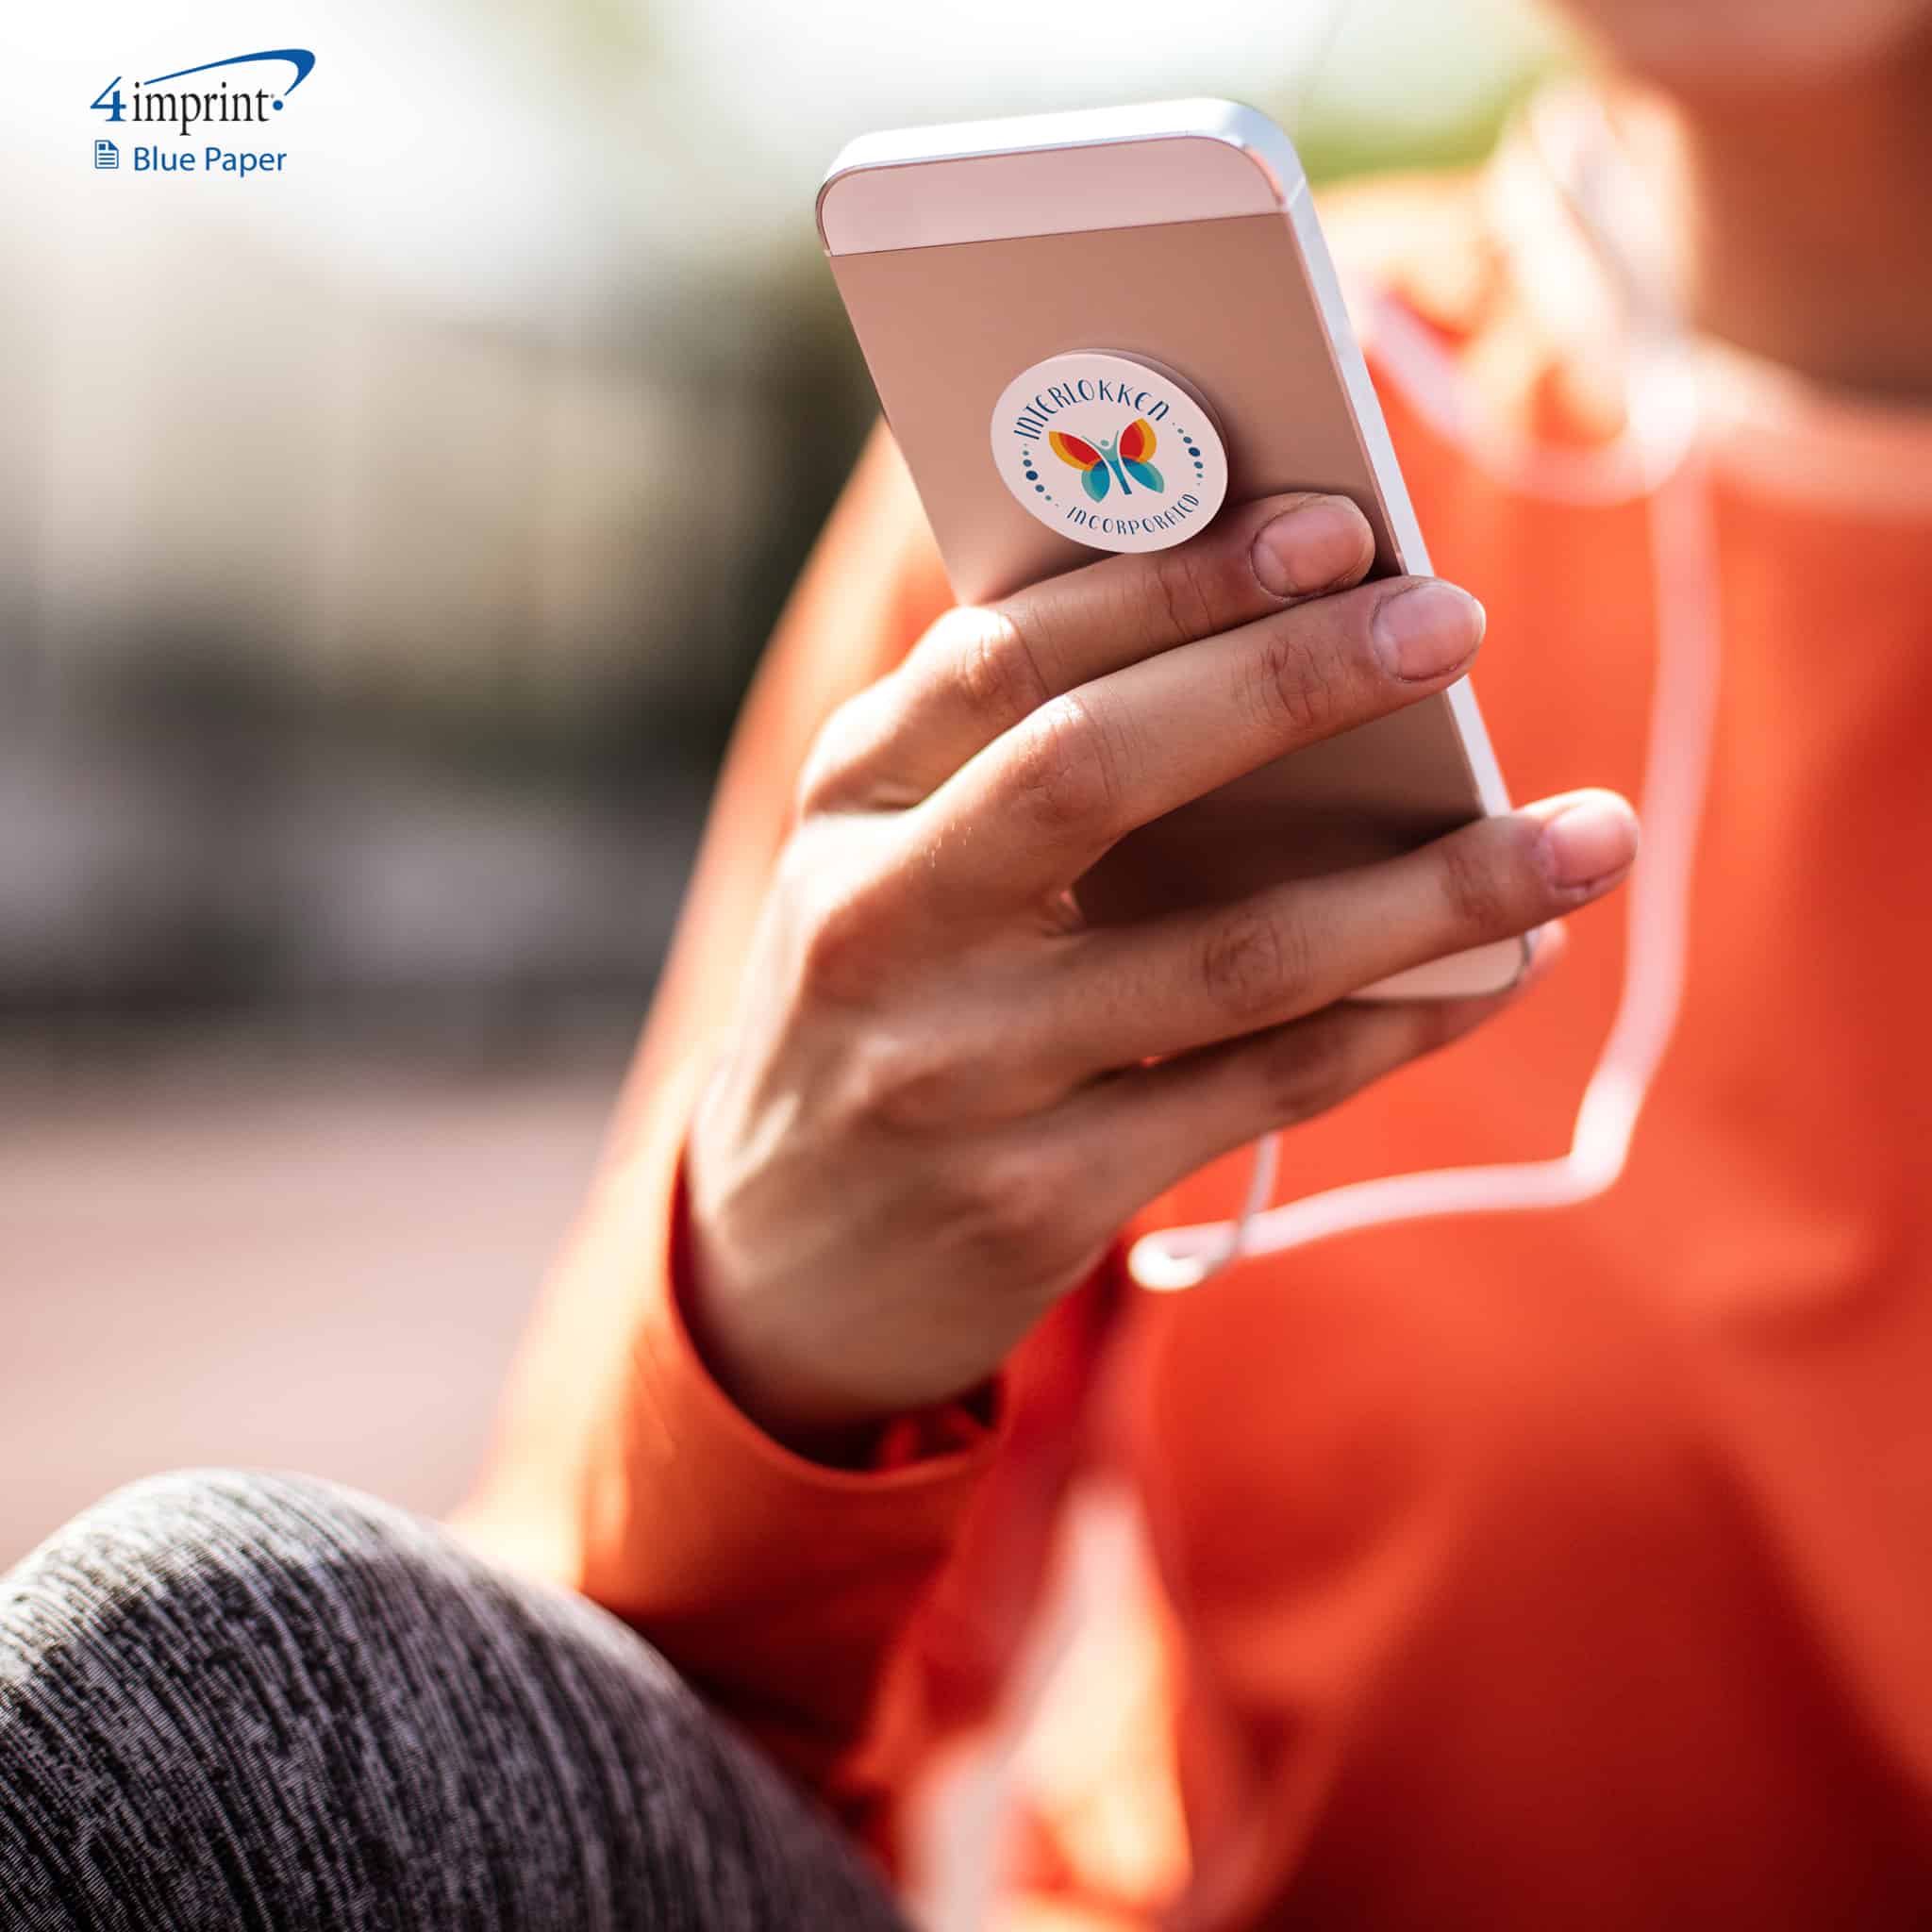 Person wearing trendy heathered running pants and looking on her phone with a branded pop socket. Fashion-forward advertising promotional products get used.